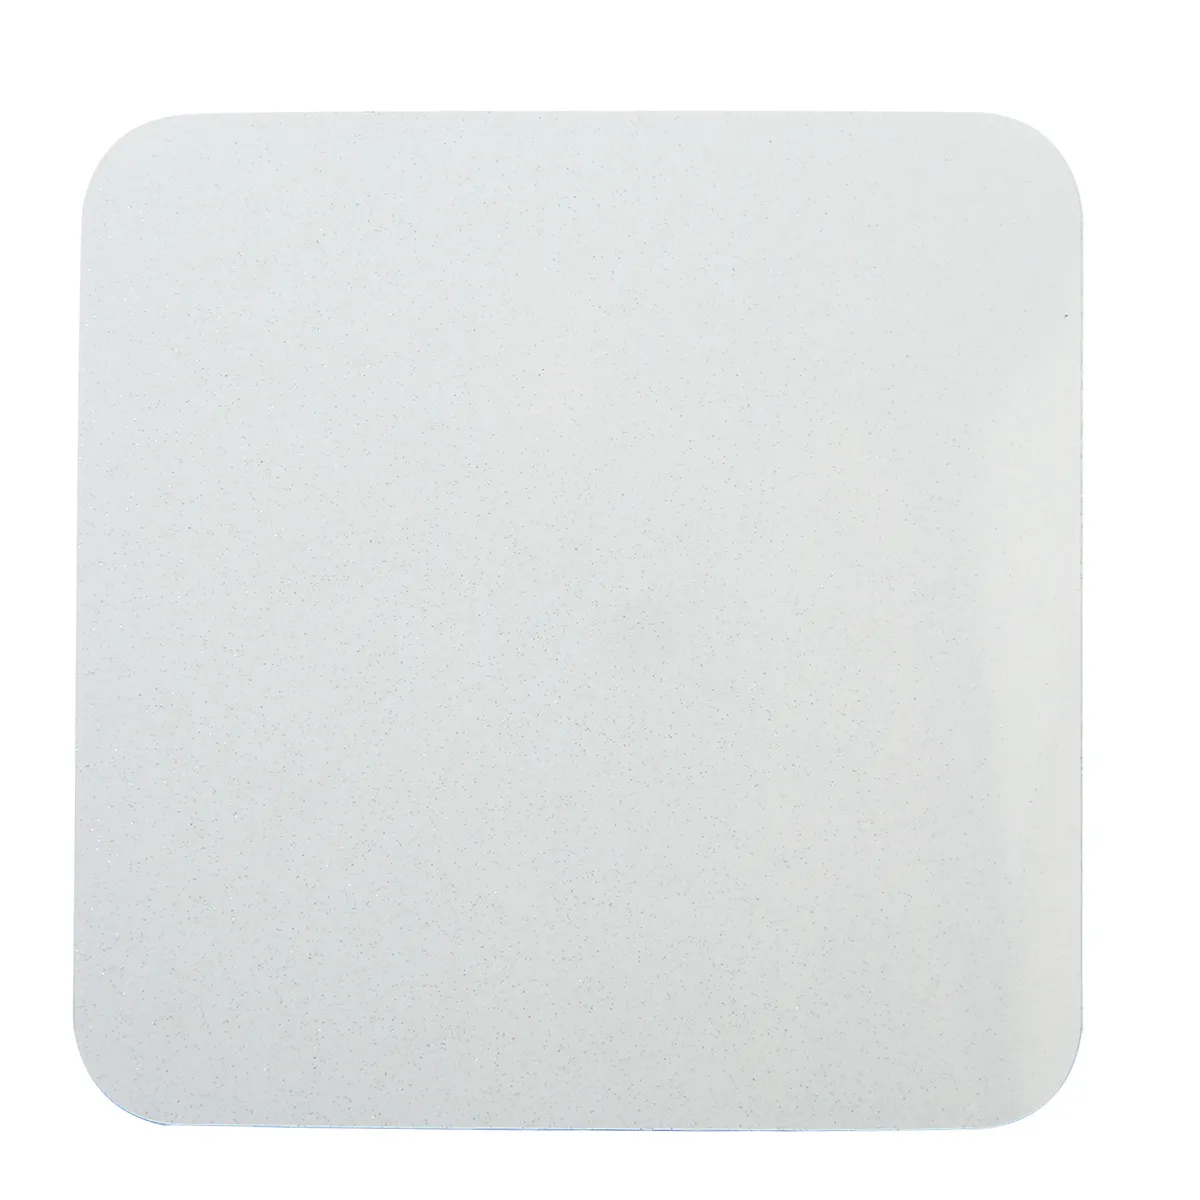 10Pcs 95x95mm Rubber Sublimation Coaster Blank Coaster Board Sublimation MDF Printing For Heat Press Machine